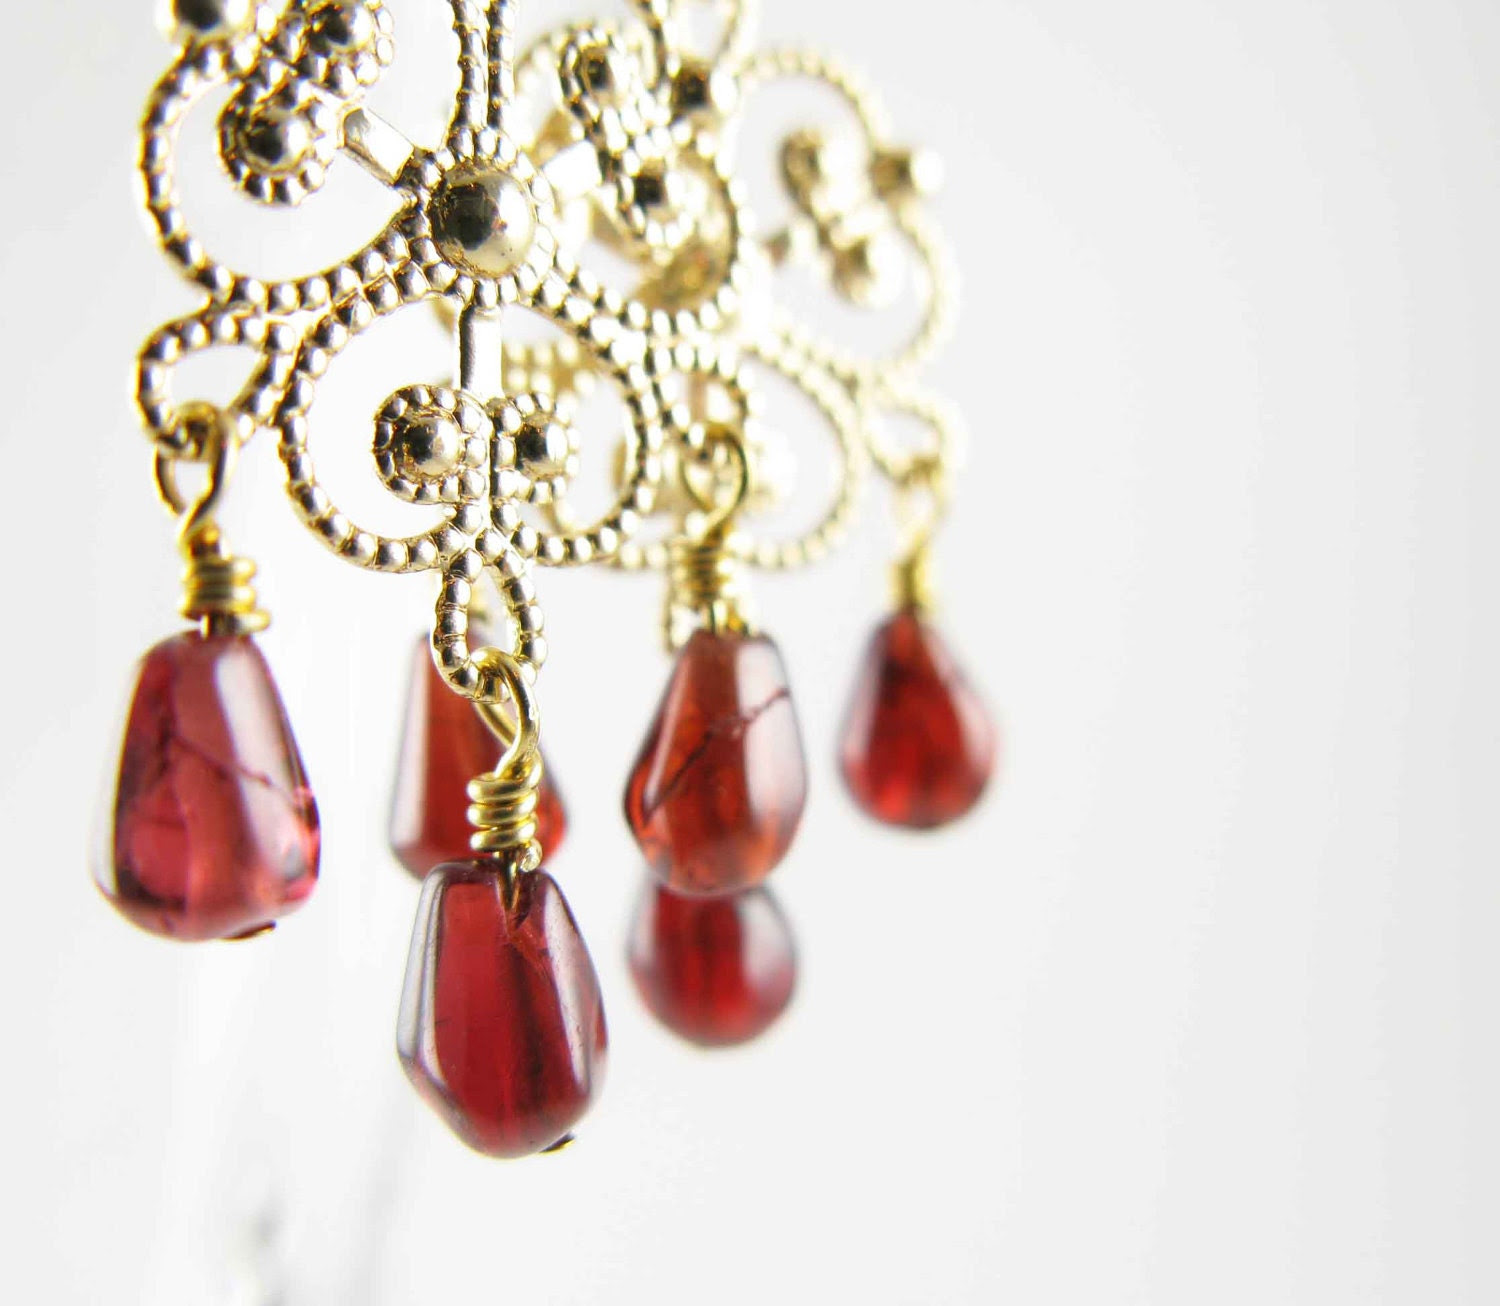 Hand assembled Chandelier earrings - gold plated filigree with garnet drops - Free shipping - mejjewelry